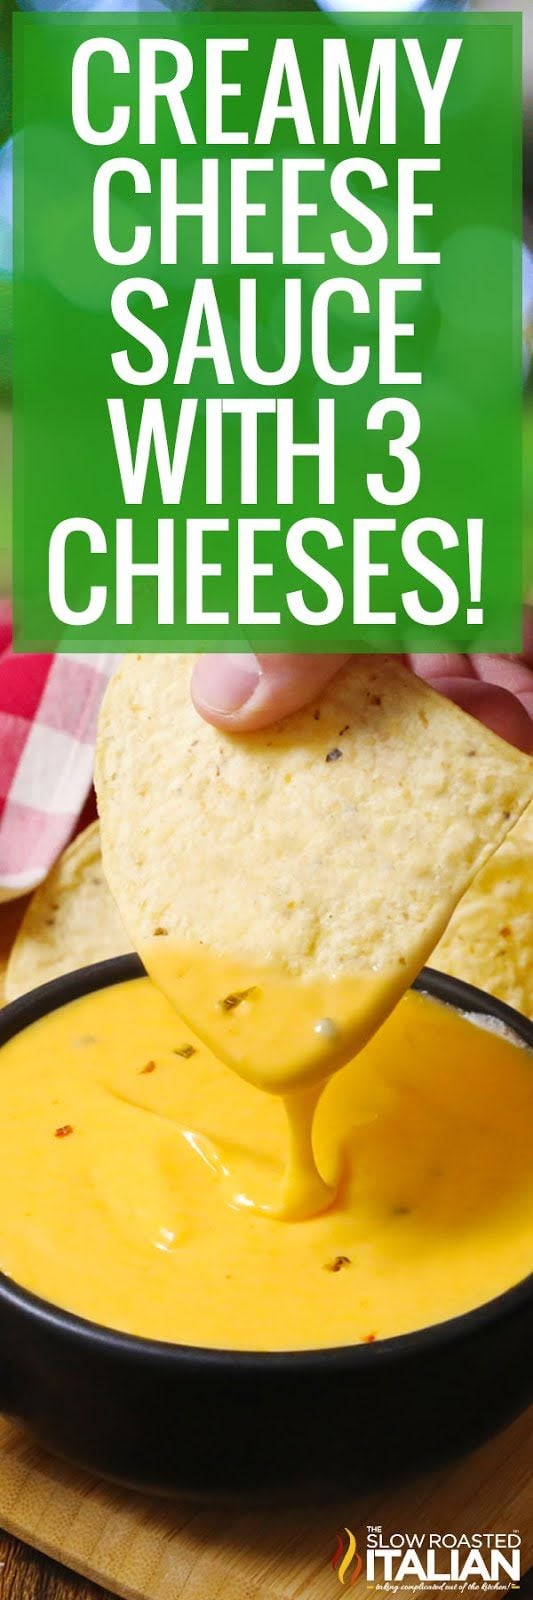 titled image for creamy cheese sauce recipe with 3 cheeses